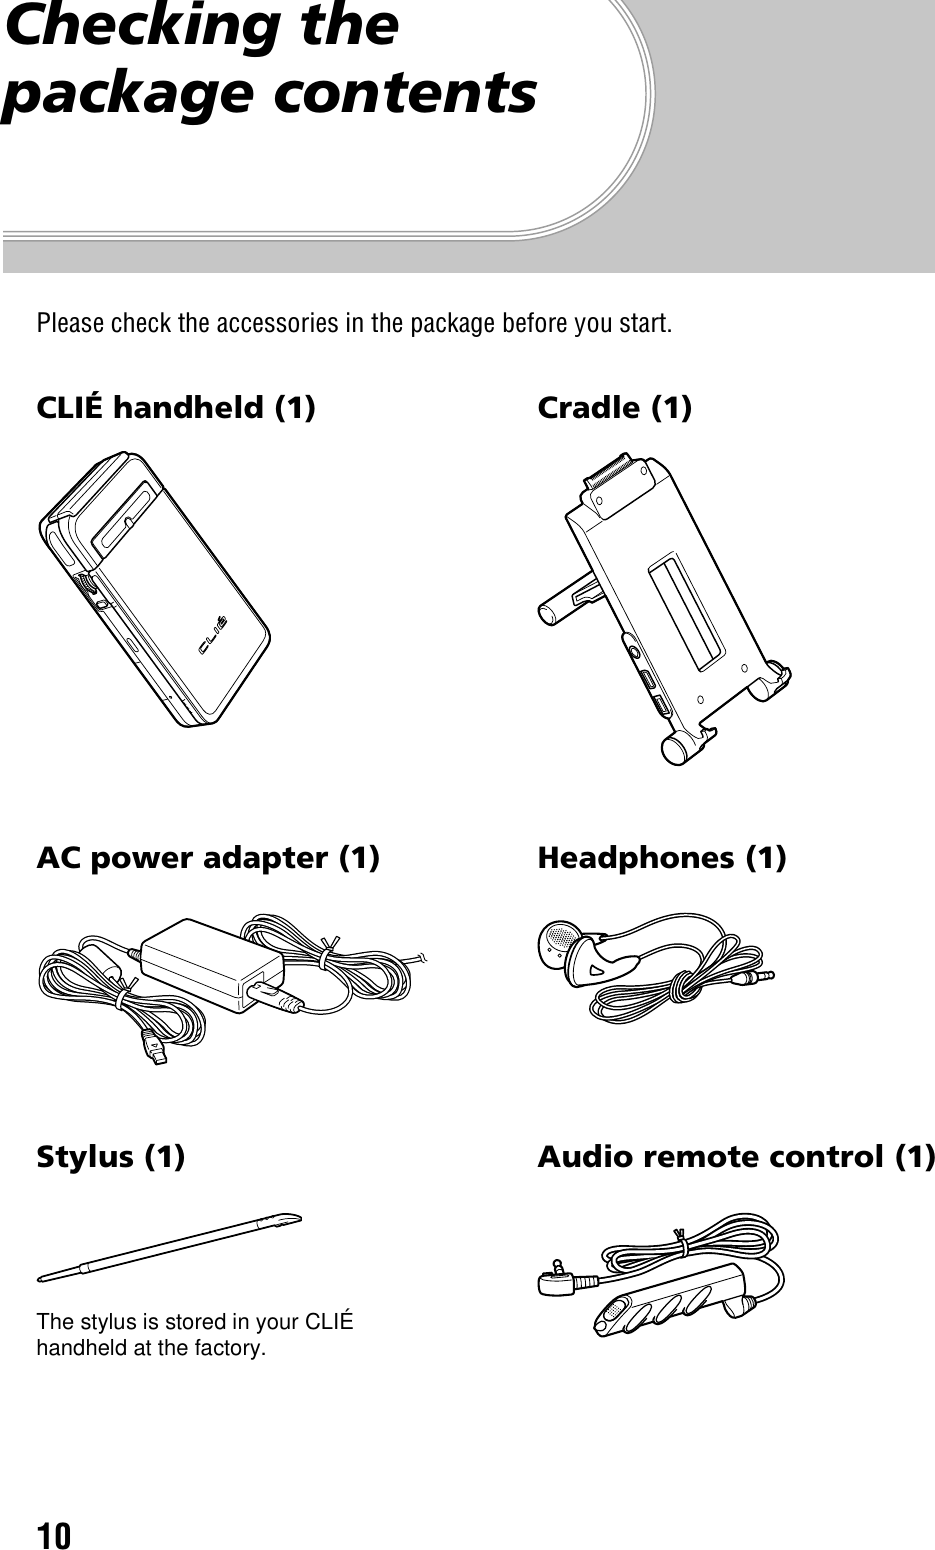 10Checking the package contentsPlease check the accessories in the package before you start.CLIÉ handheld (1) Cradle (1)AC power adapter (1) Headphones (1)Stylus (1) Audio remote control (1)The stylus is stored in your CLIÉ handheld at the factory.